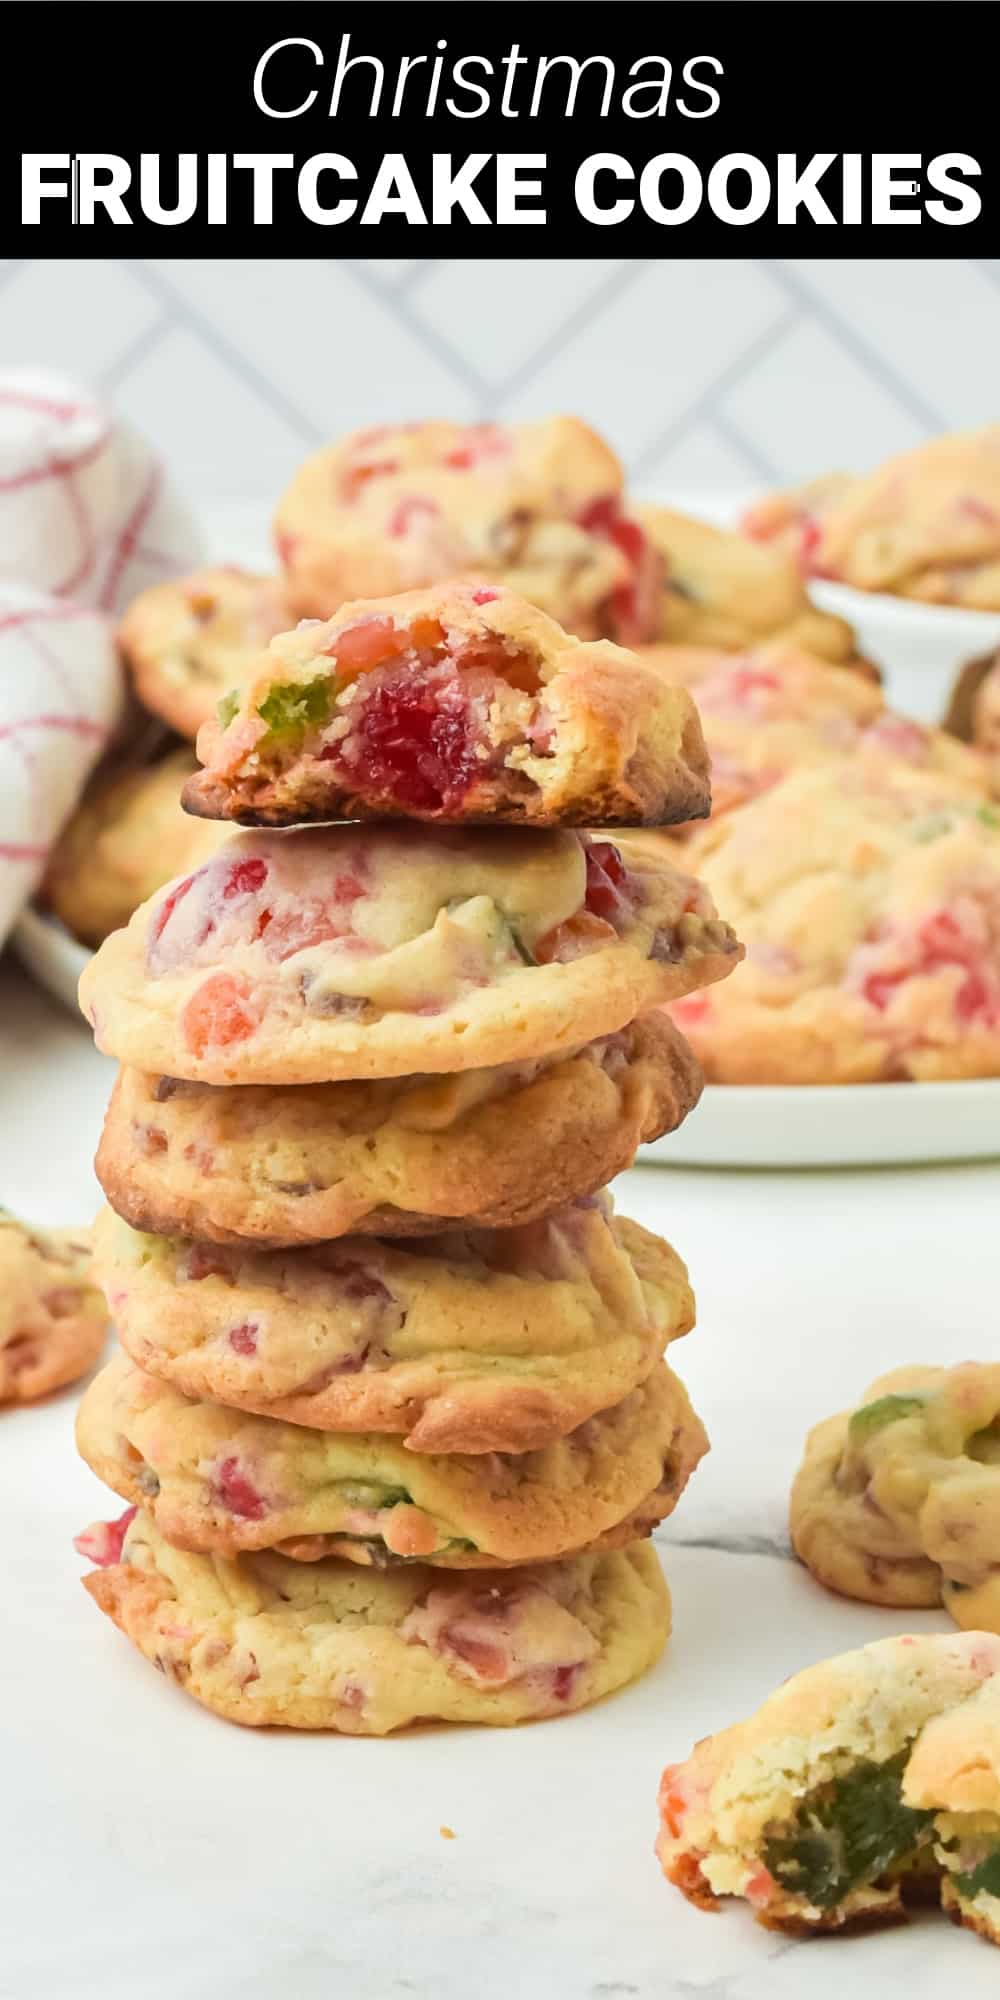 This fruitcake cookies recipe gives a modern makeover to the traditional holiday dessert. Soft and chewy cookies are filled with sweet and colorful chunks of candied fruit, giving them tons of flavor and texture. These beautiful treats will be a delicious and festive addition to your holiday recipe collection.